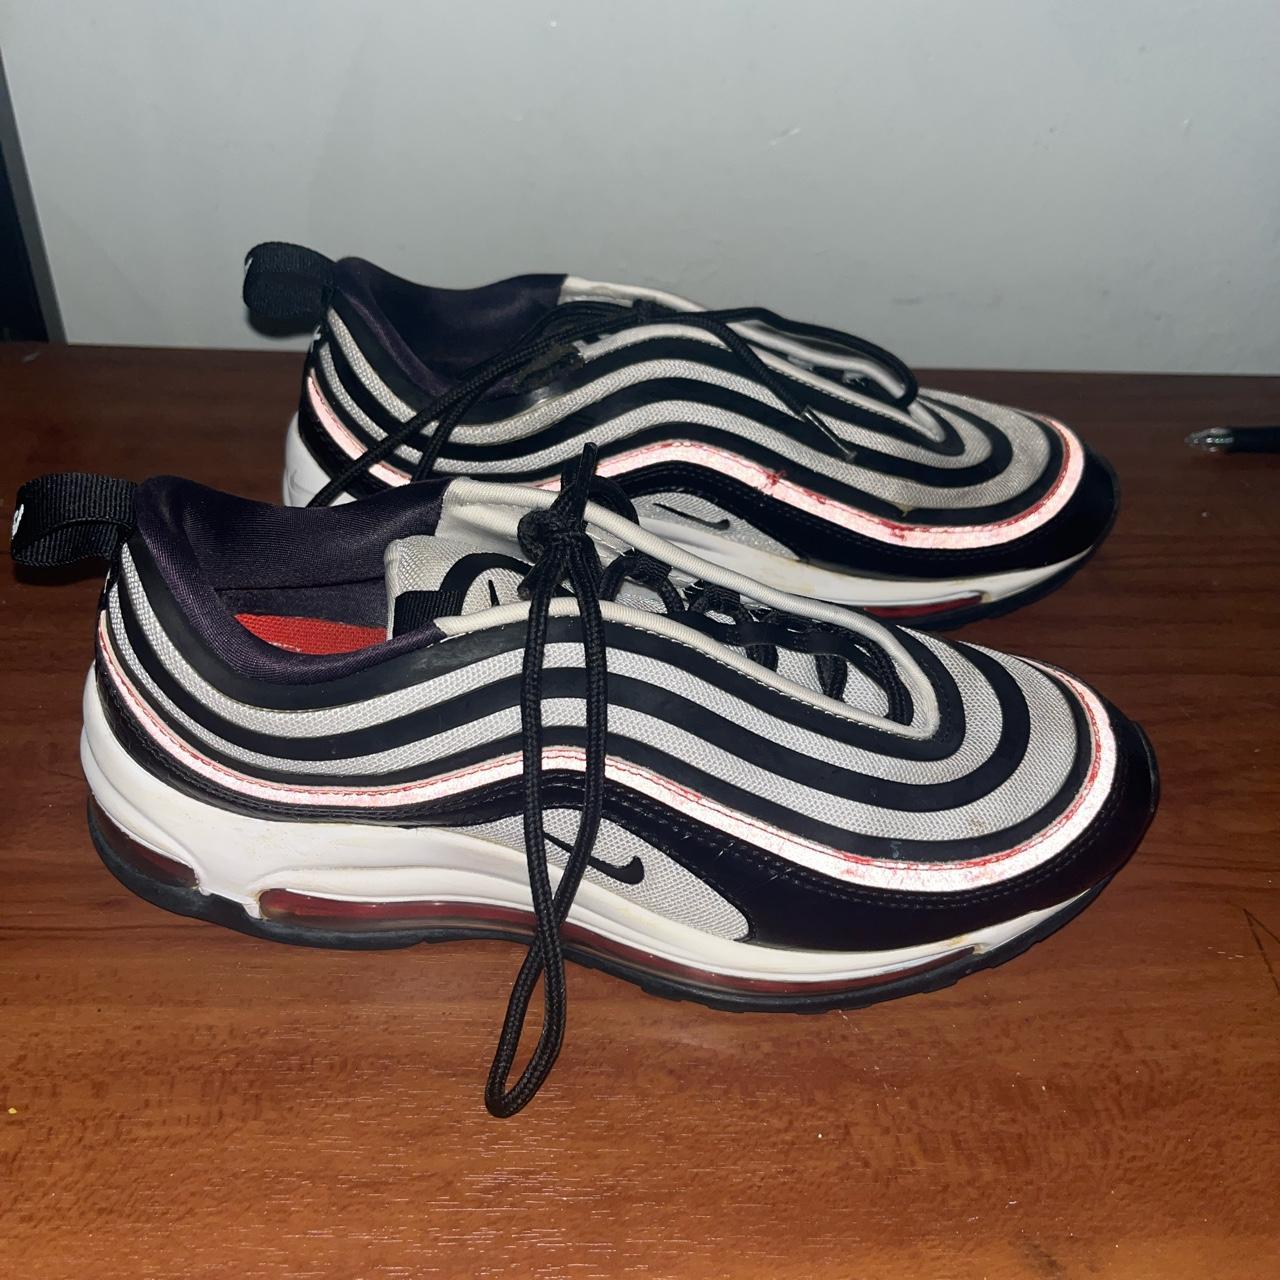 Product Image 2 - Nike Air Max 97

Size 8